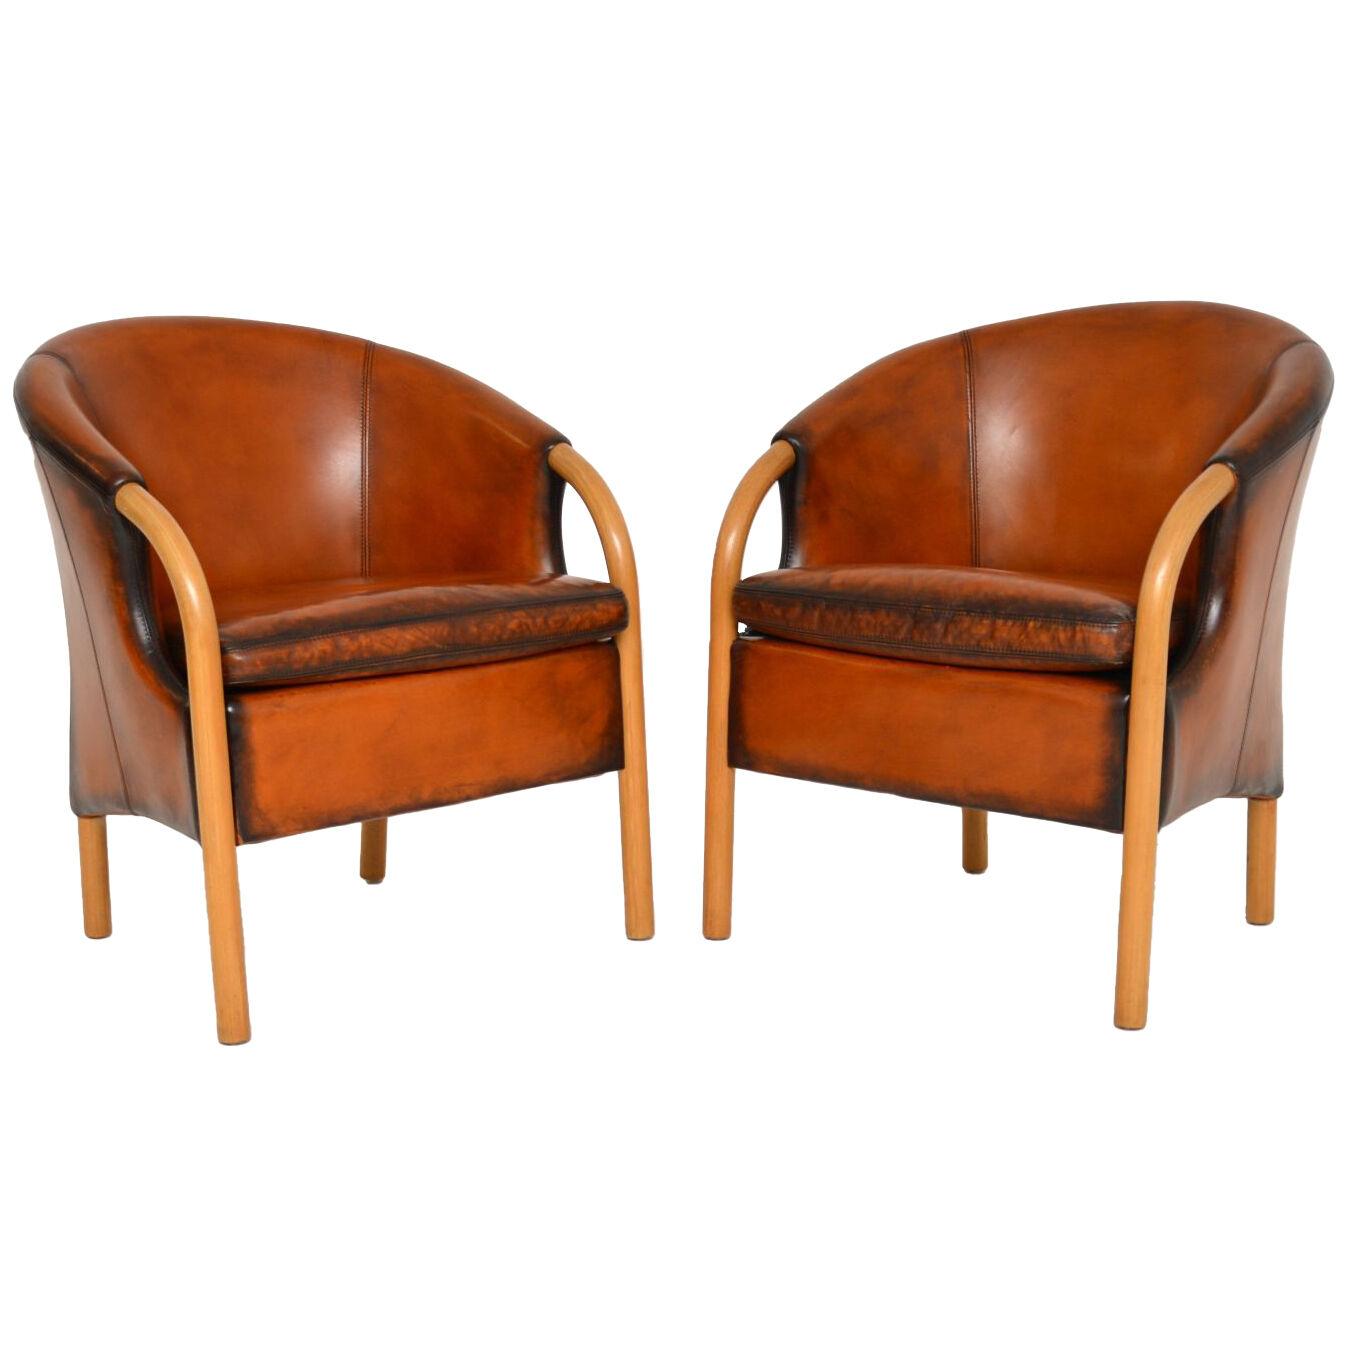 Pair of Danish Vintage Leather Armchairs by Stouby